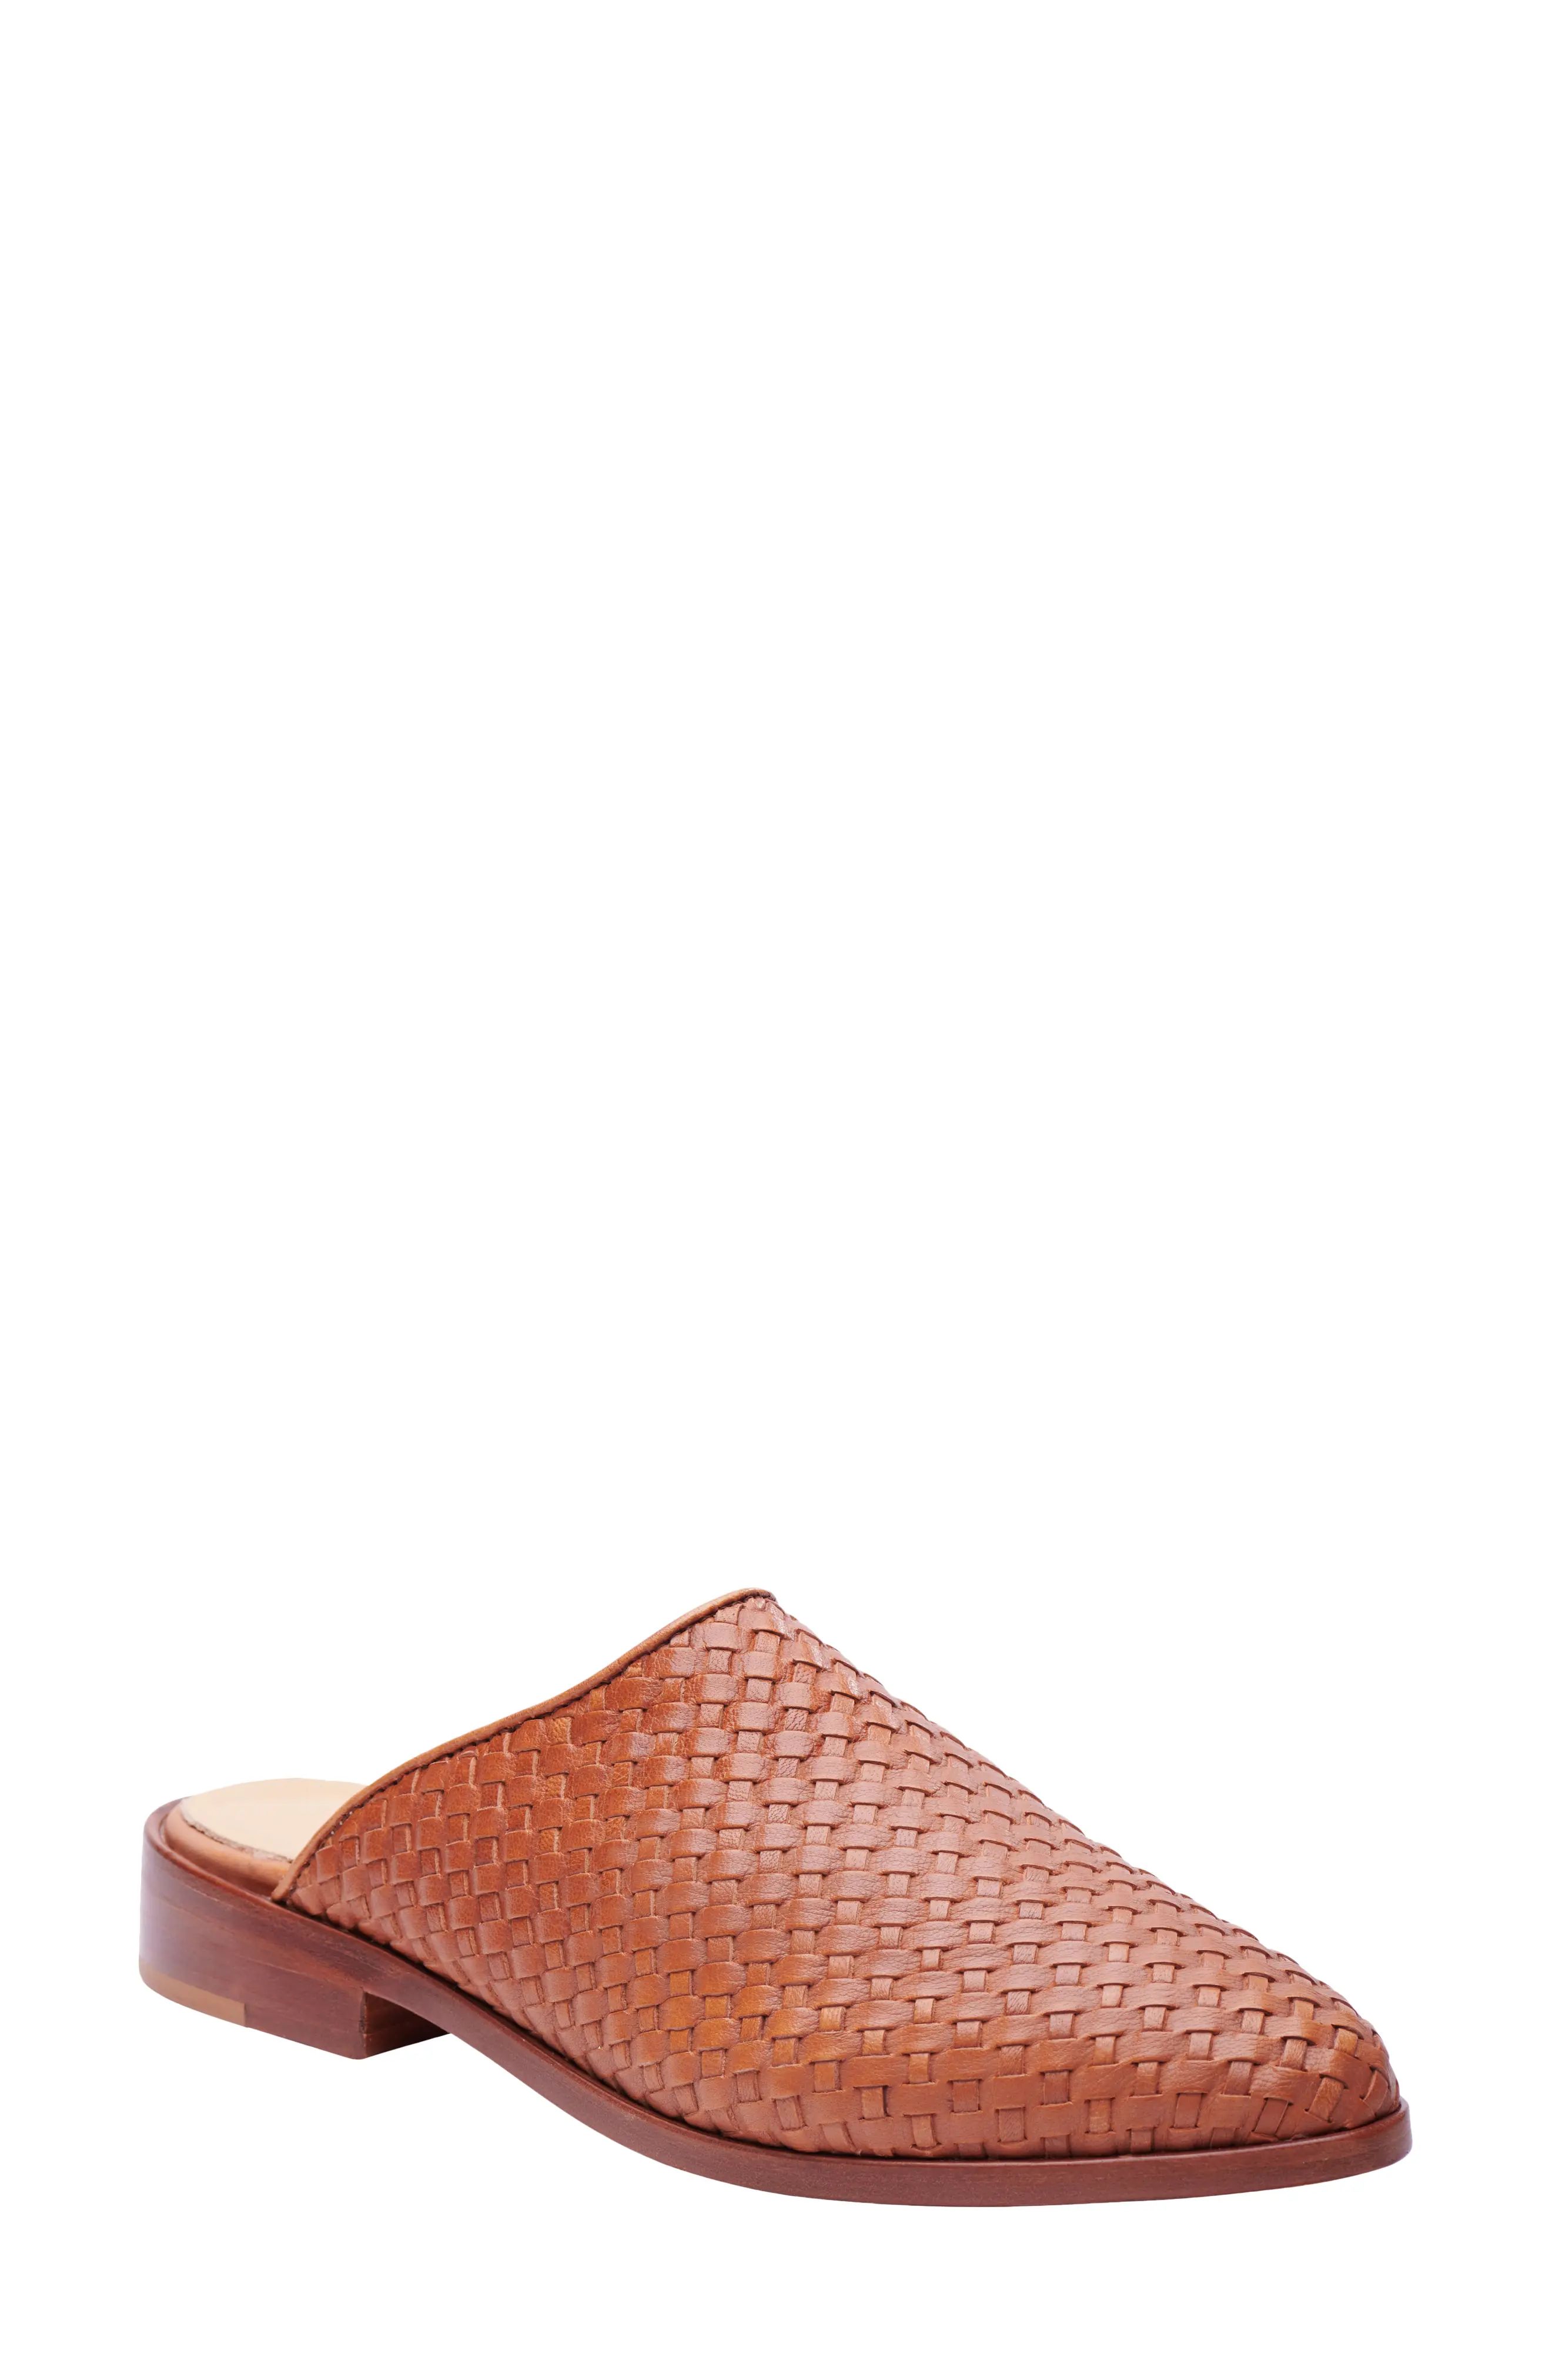 Nisolo Ama Woven Mule, Size 7 in Brown at Nordstrom | Nordstrom